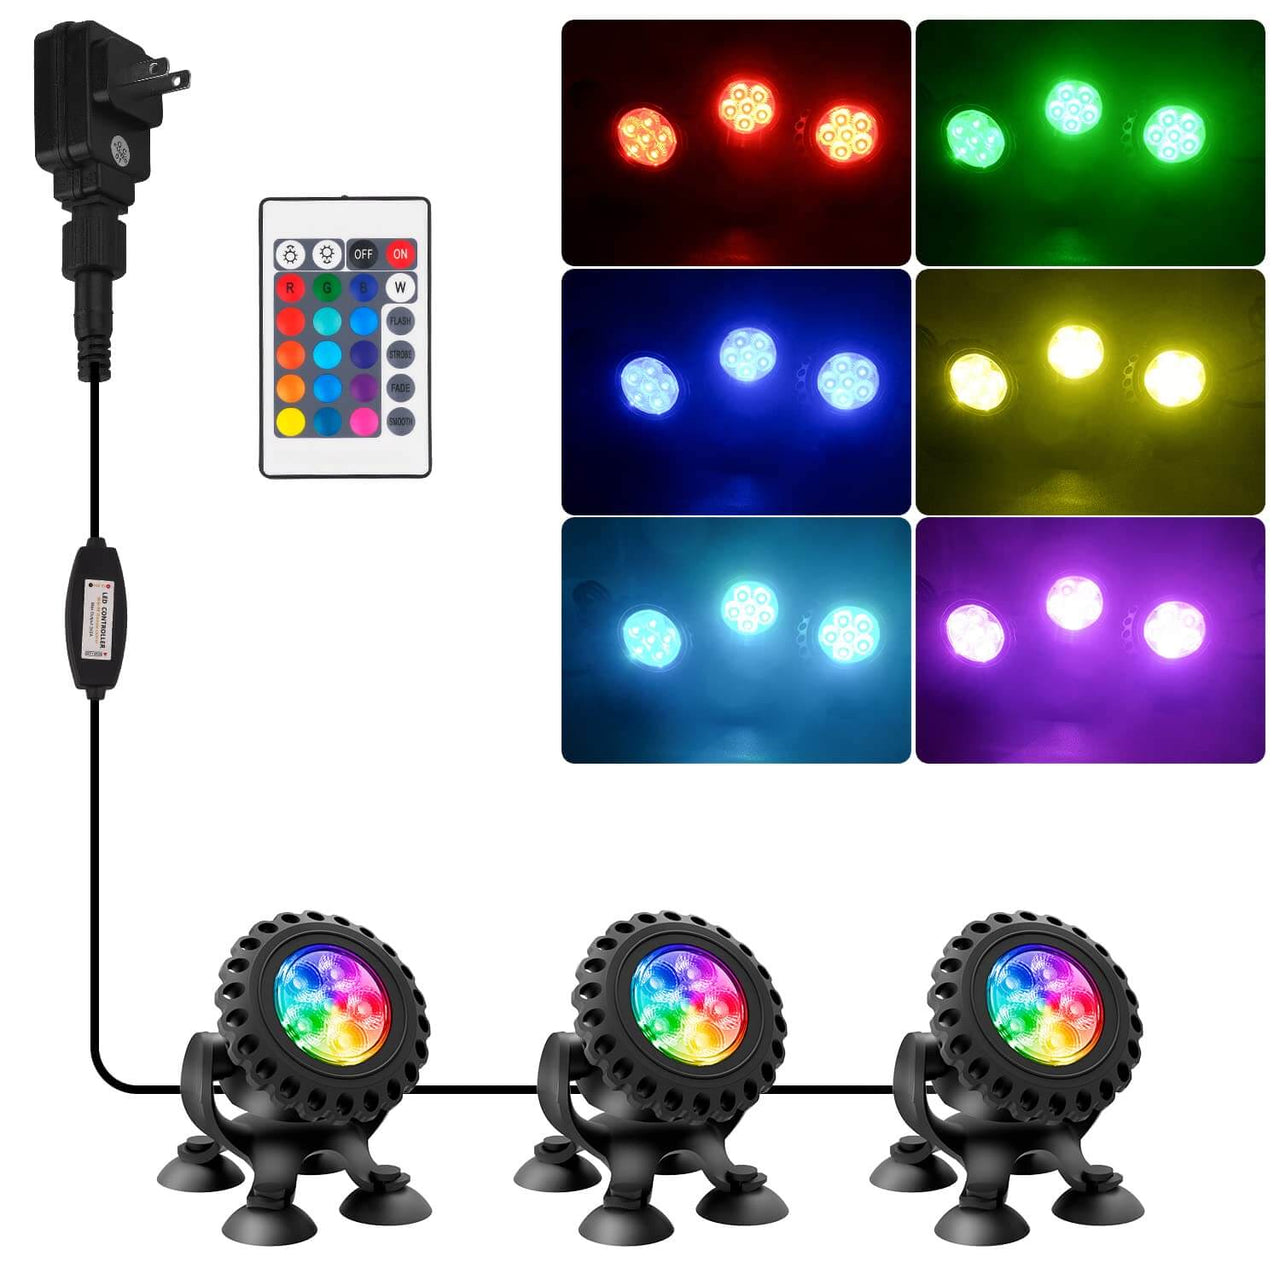 Submersible LED Pond Lights RGB Underwater Lights for Tank Pool